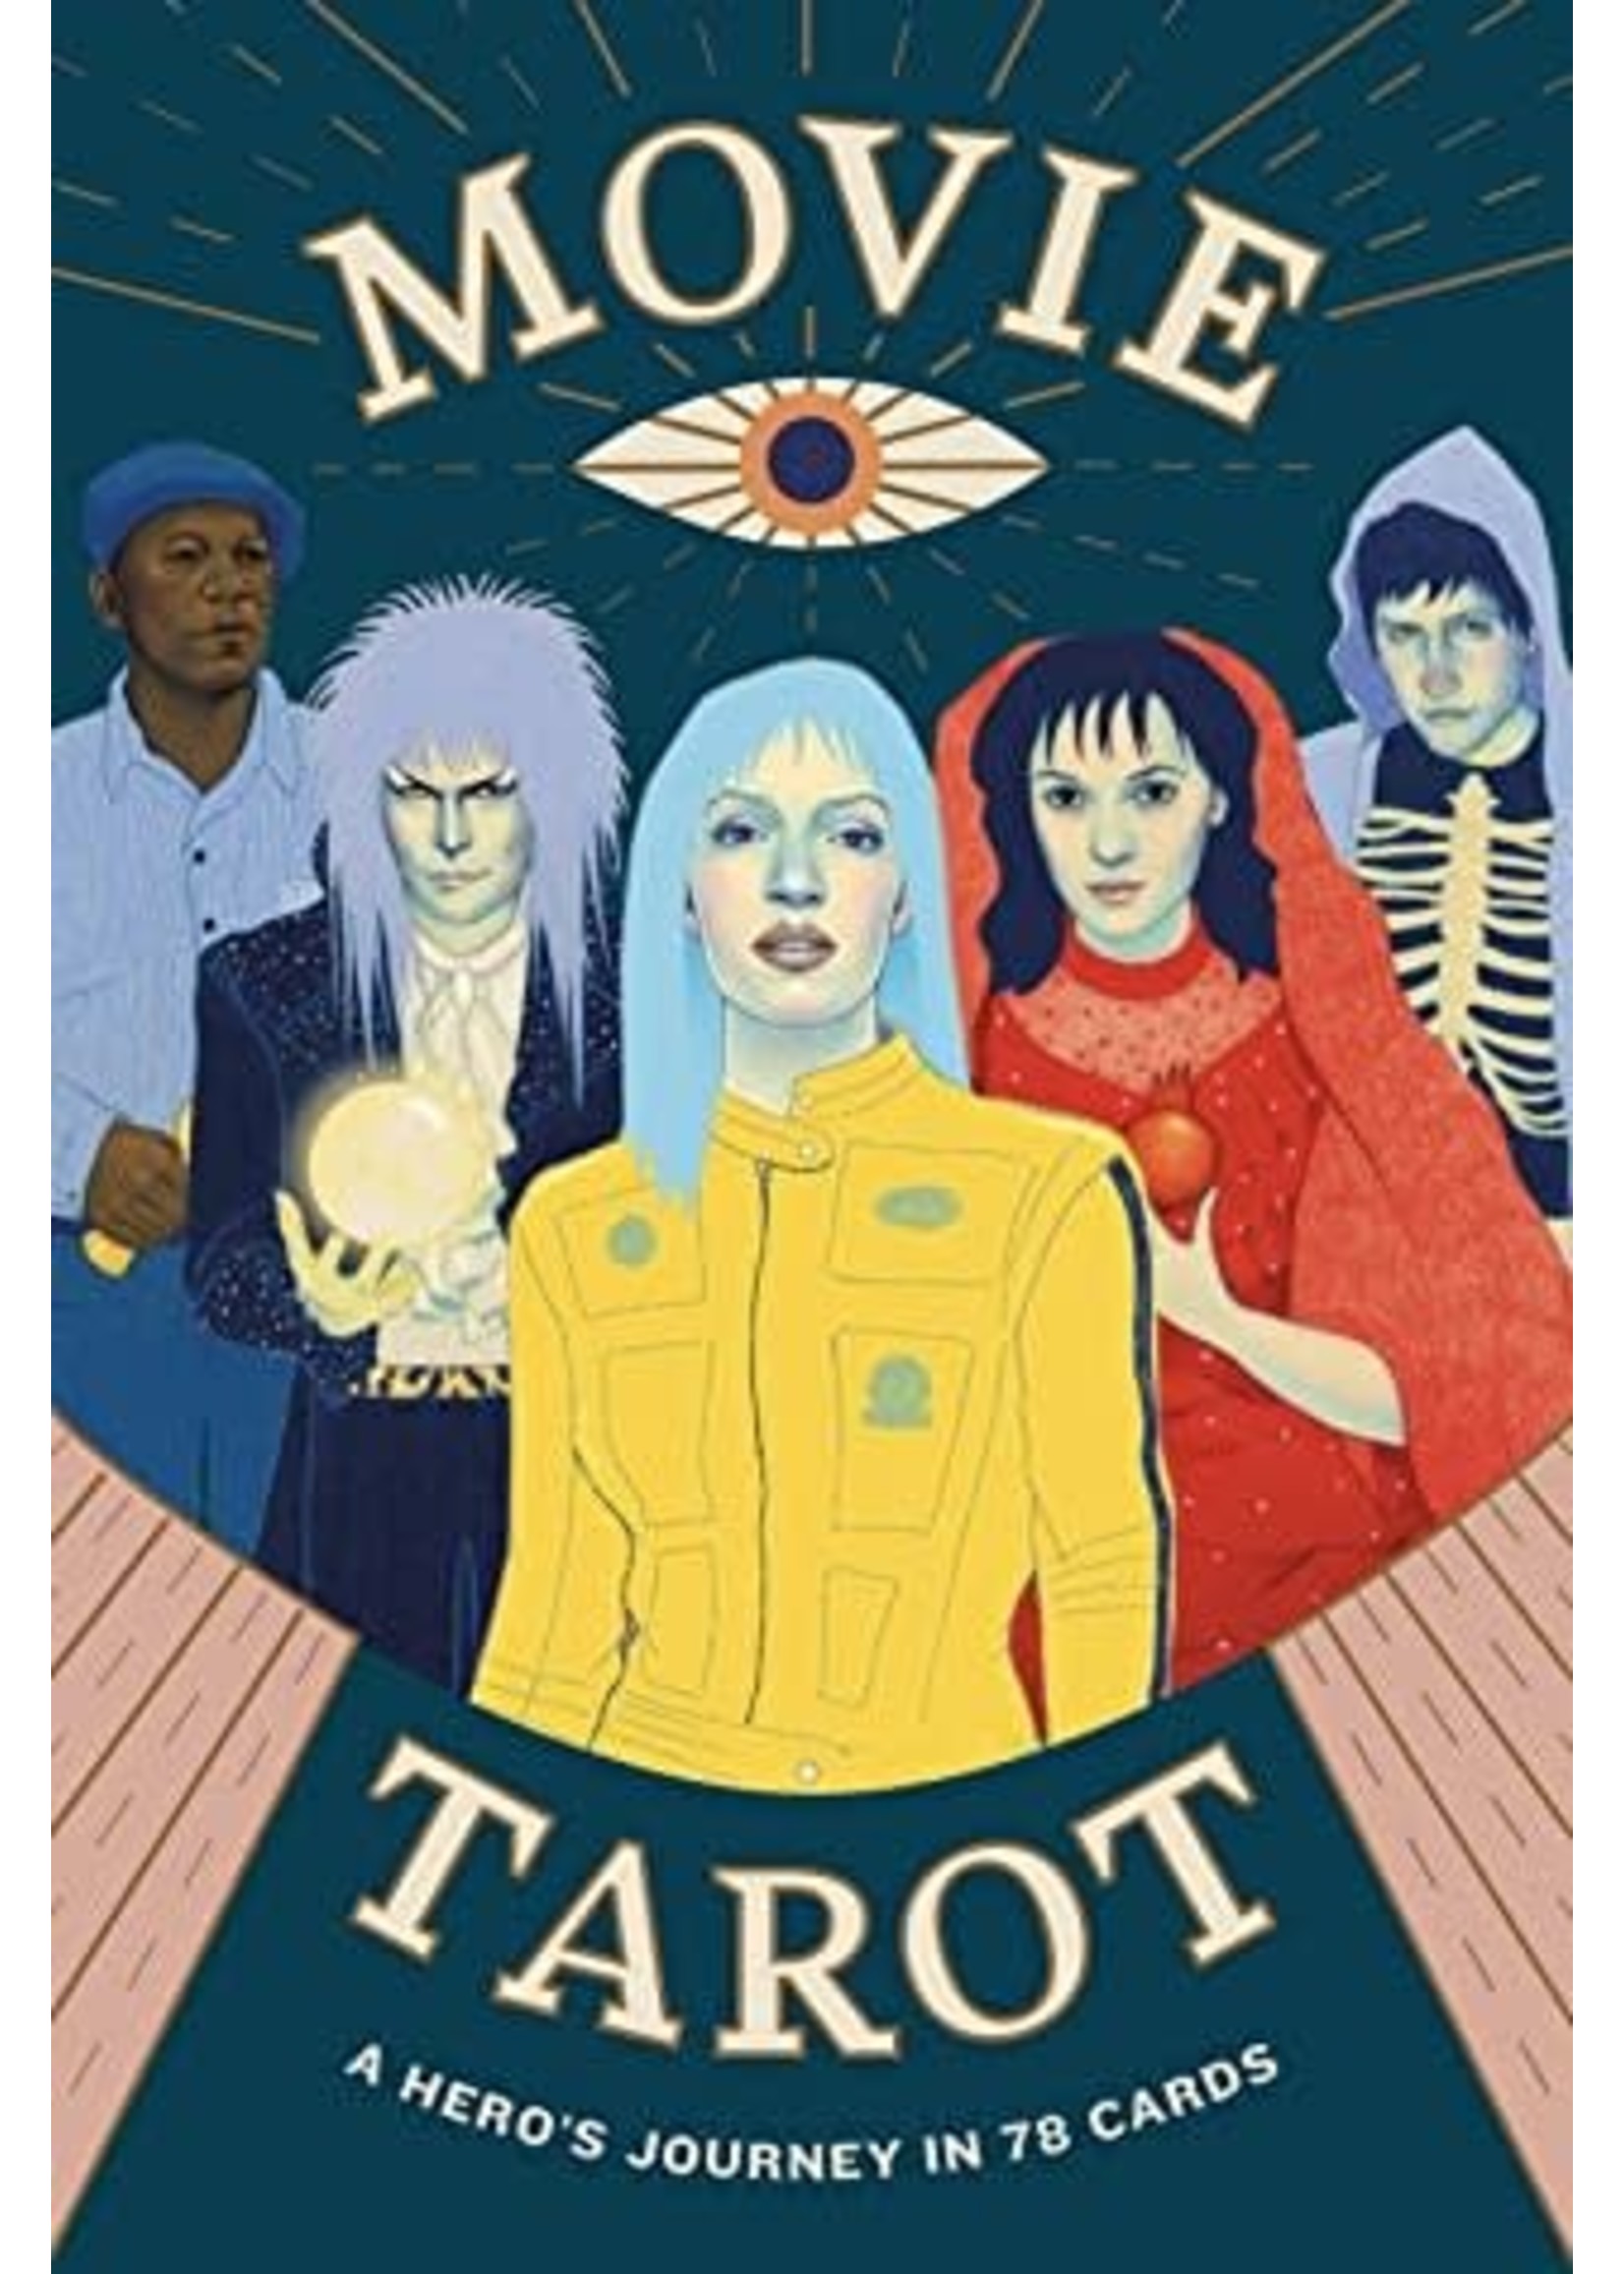 Movie Tarot: A Hero's Journey in 78 Cards by Diana McMahon Collis, Natalie Foss